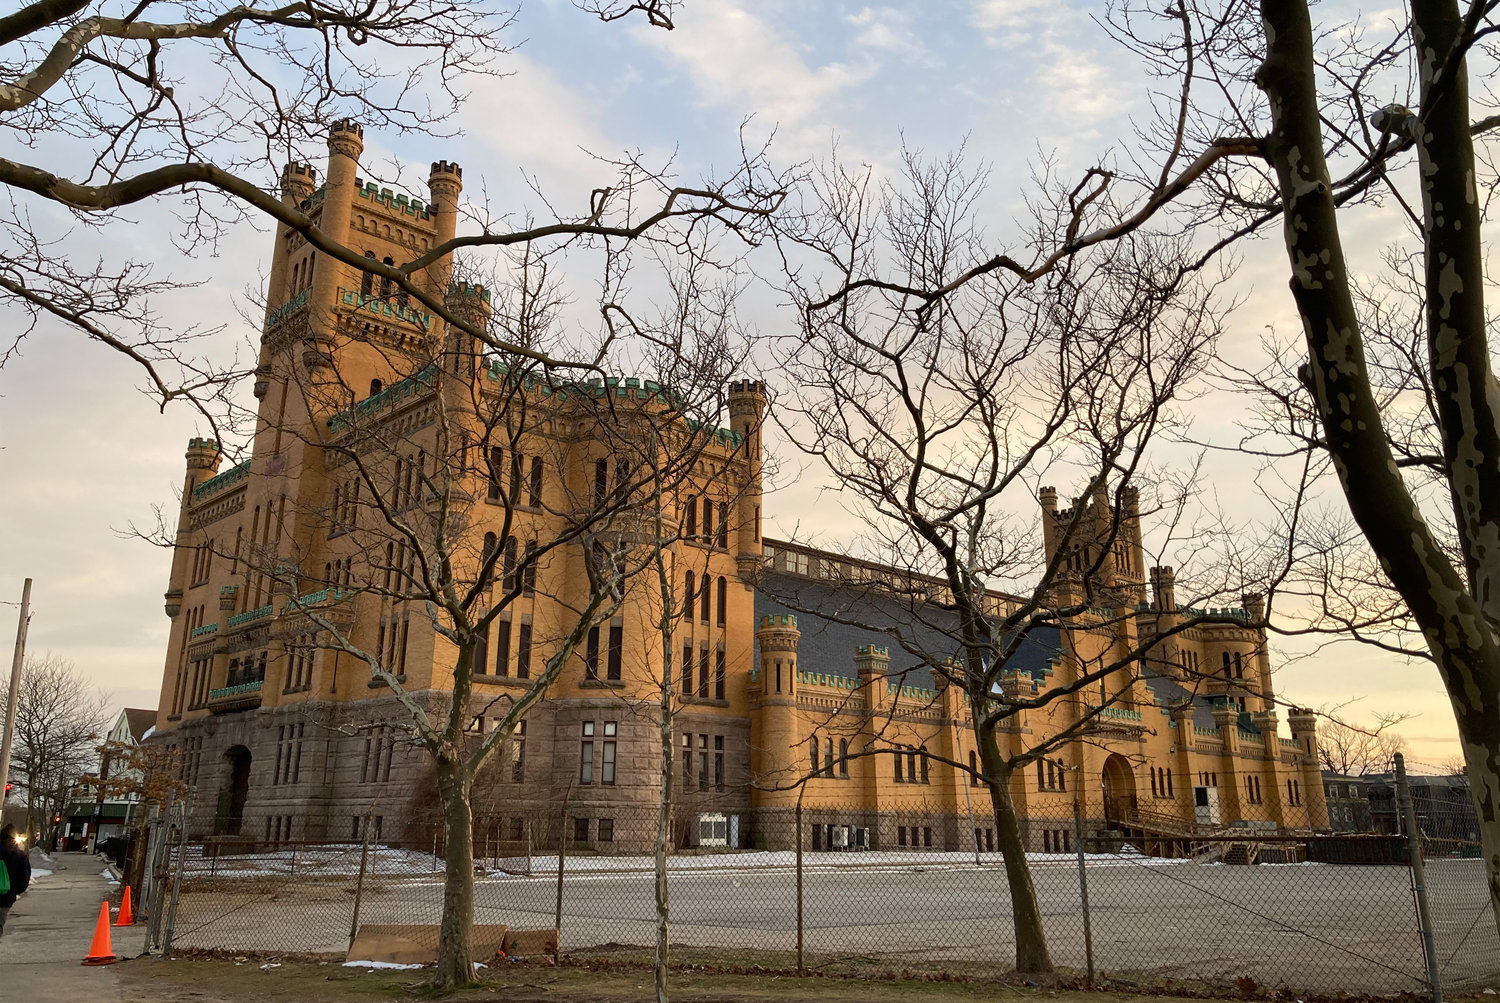 The Cranston Street Armory opened its doors as a warming station in December